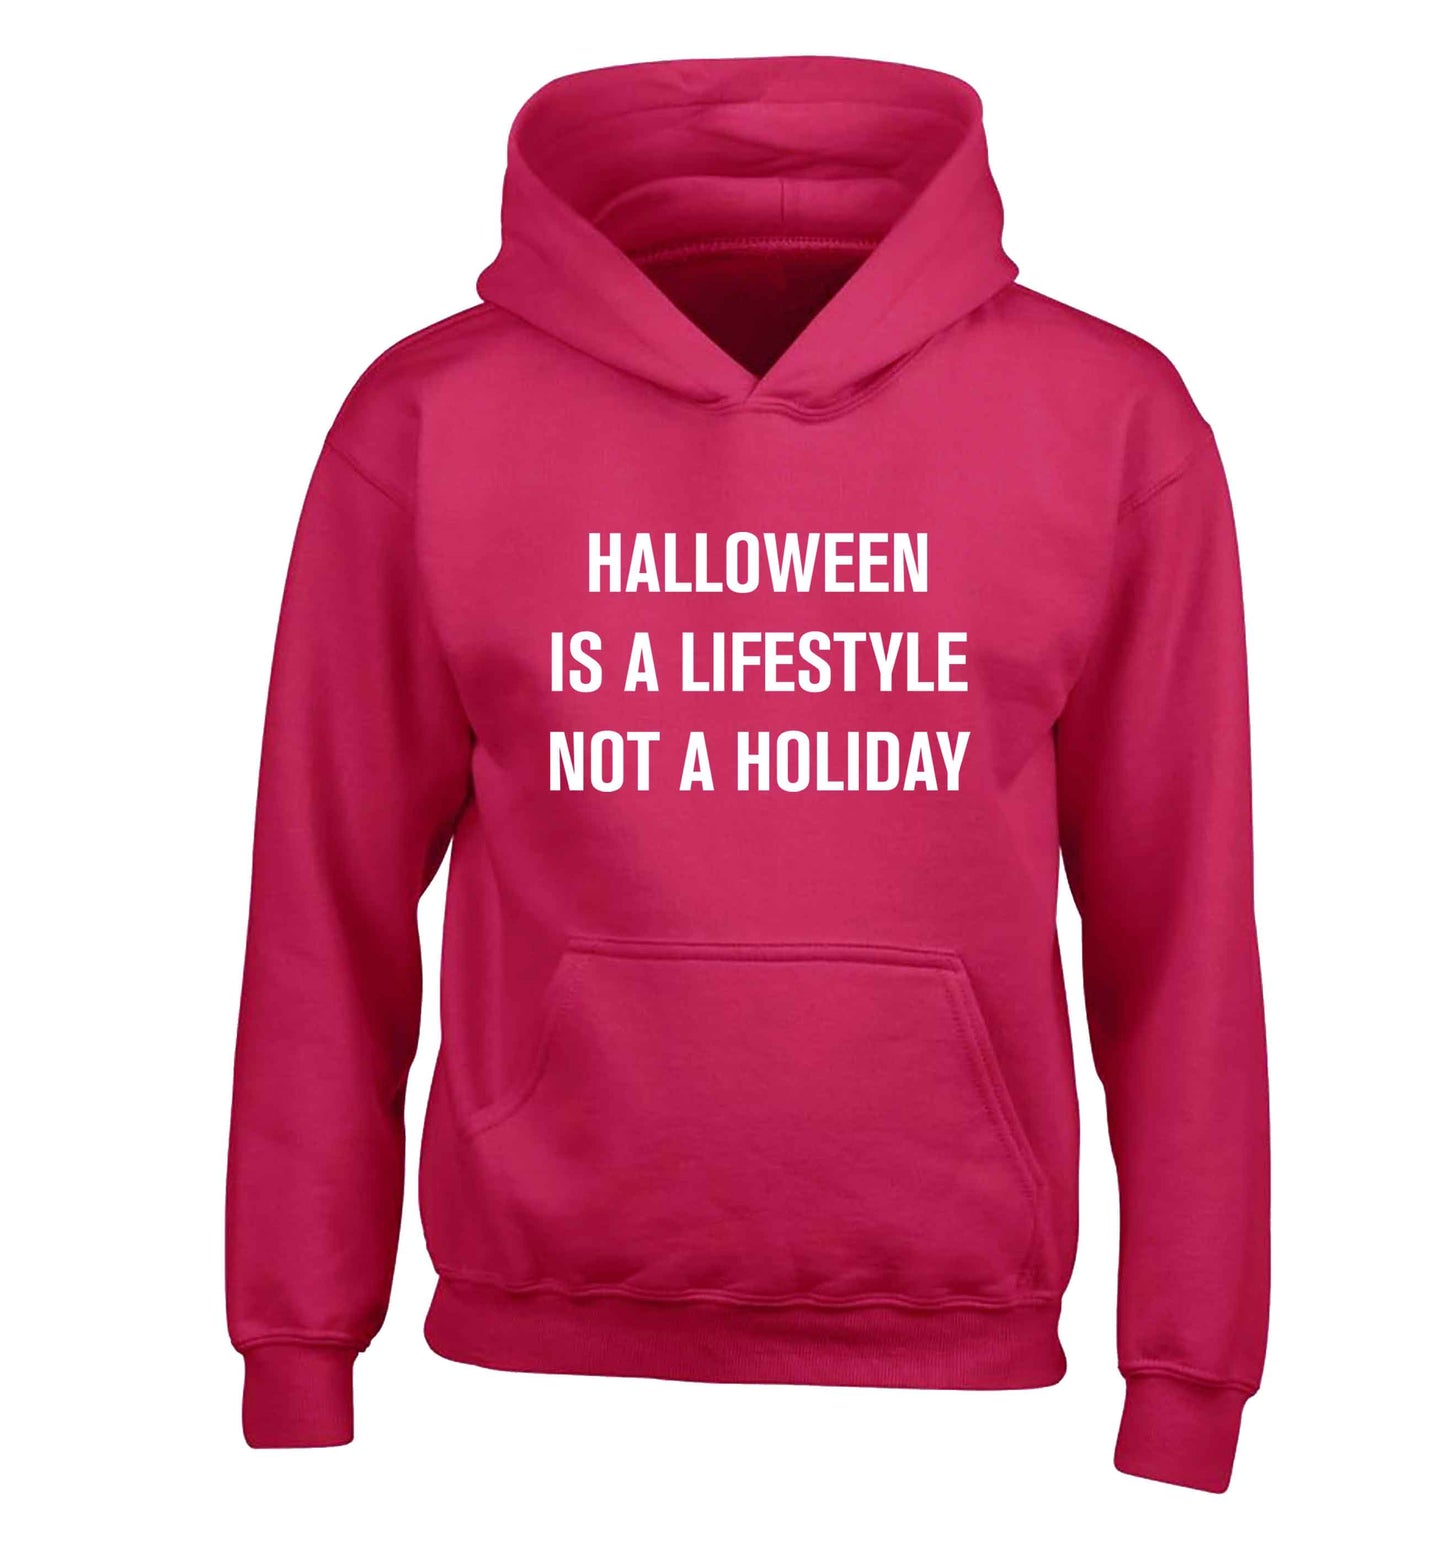 Halloween is a lifestyle not a holiday children's pink hoodie 12-13 Years